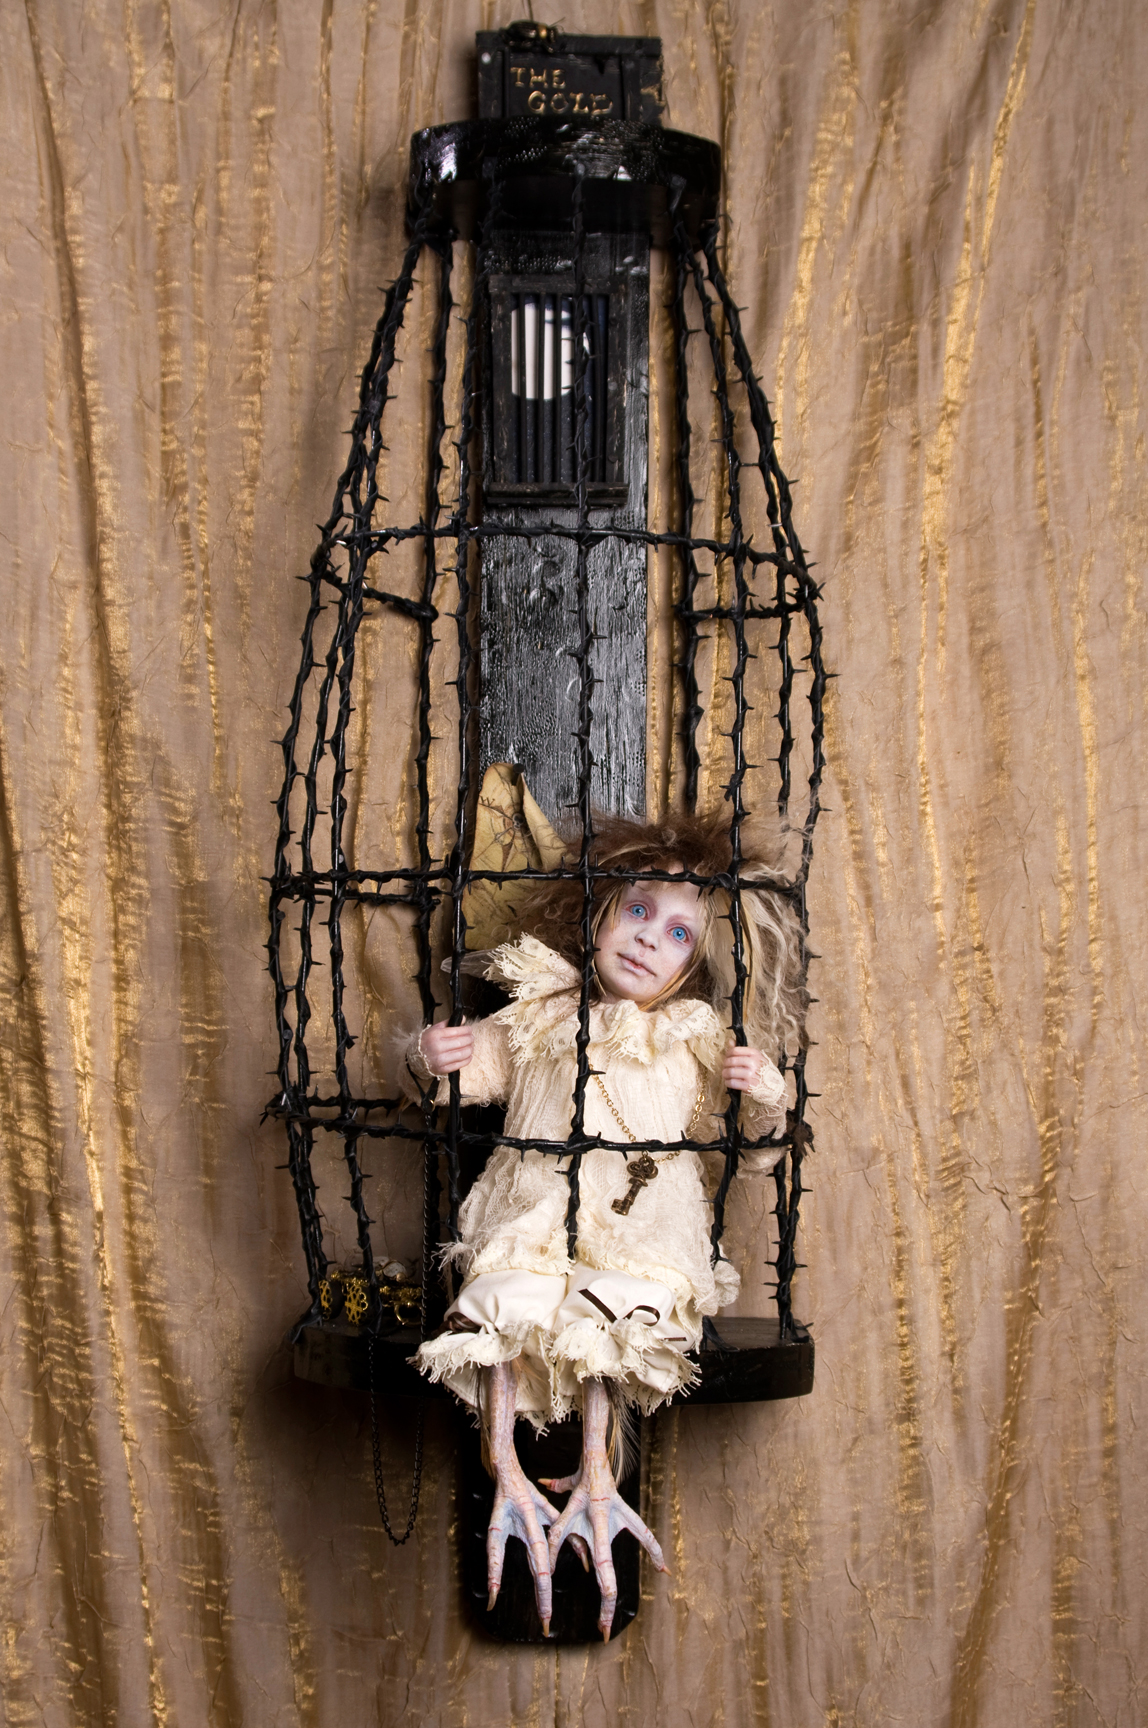 pale blue eyed blond feathered gothic artdoll in a white lace nightie with taxidermied bird feet sits in a black thorn cage with a large key on a chain around his neck.